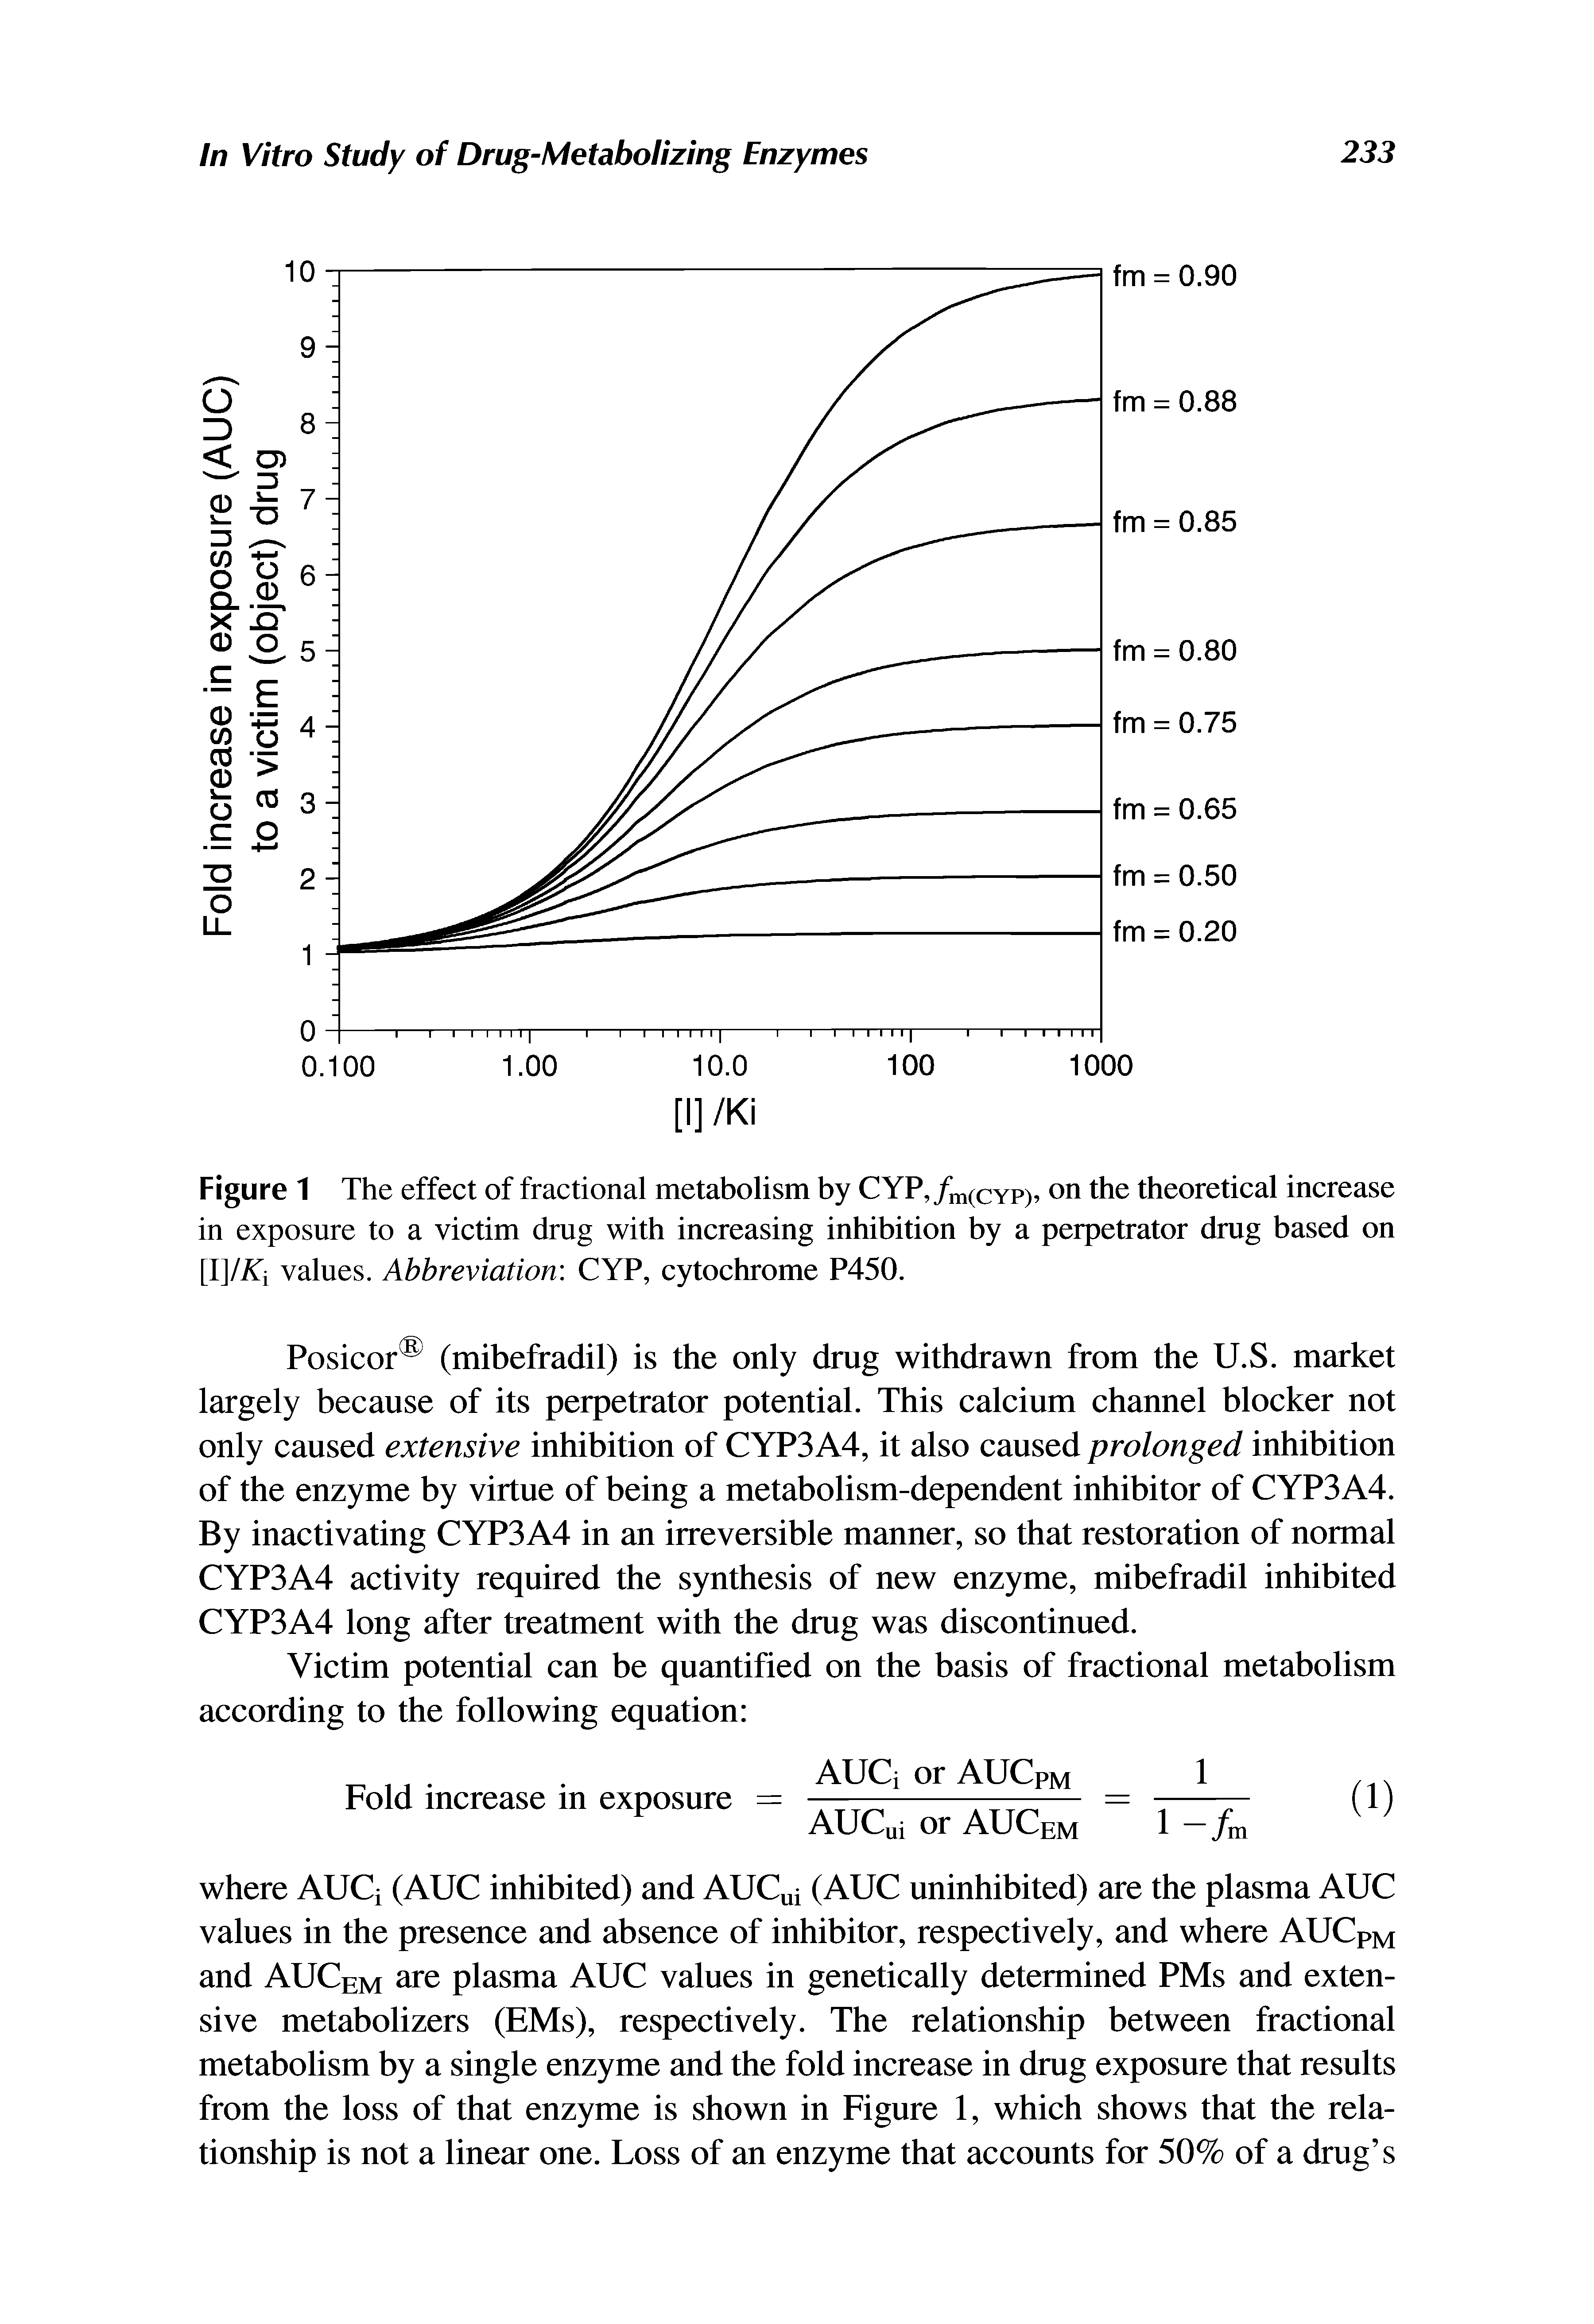 Figure 1 The effect of fractional metabolism by CYP,/m(CYp), on the theoretical increase in exposure to a victim drug with increasing inhibition by a perpetrator drug based on [I /Ki values. Abbreviation CYP, cytochrome P450.